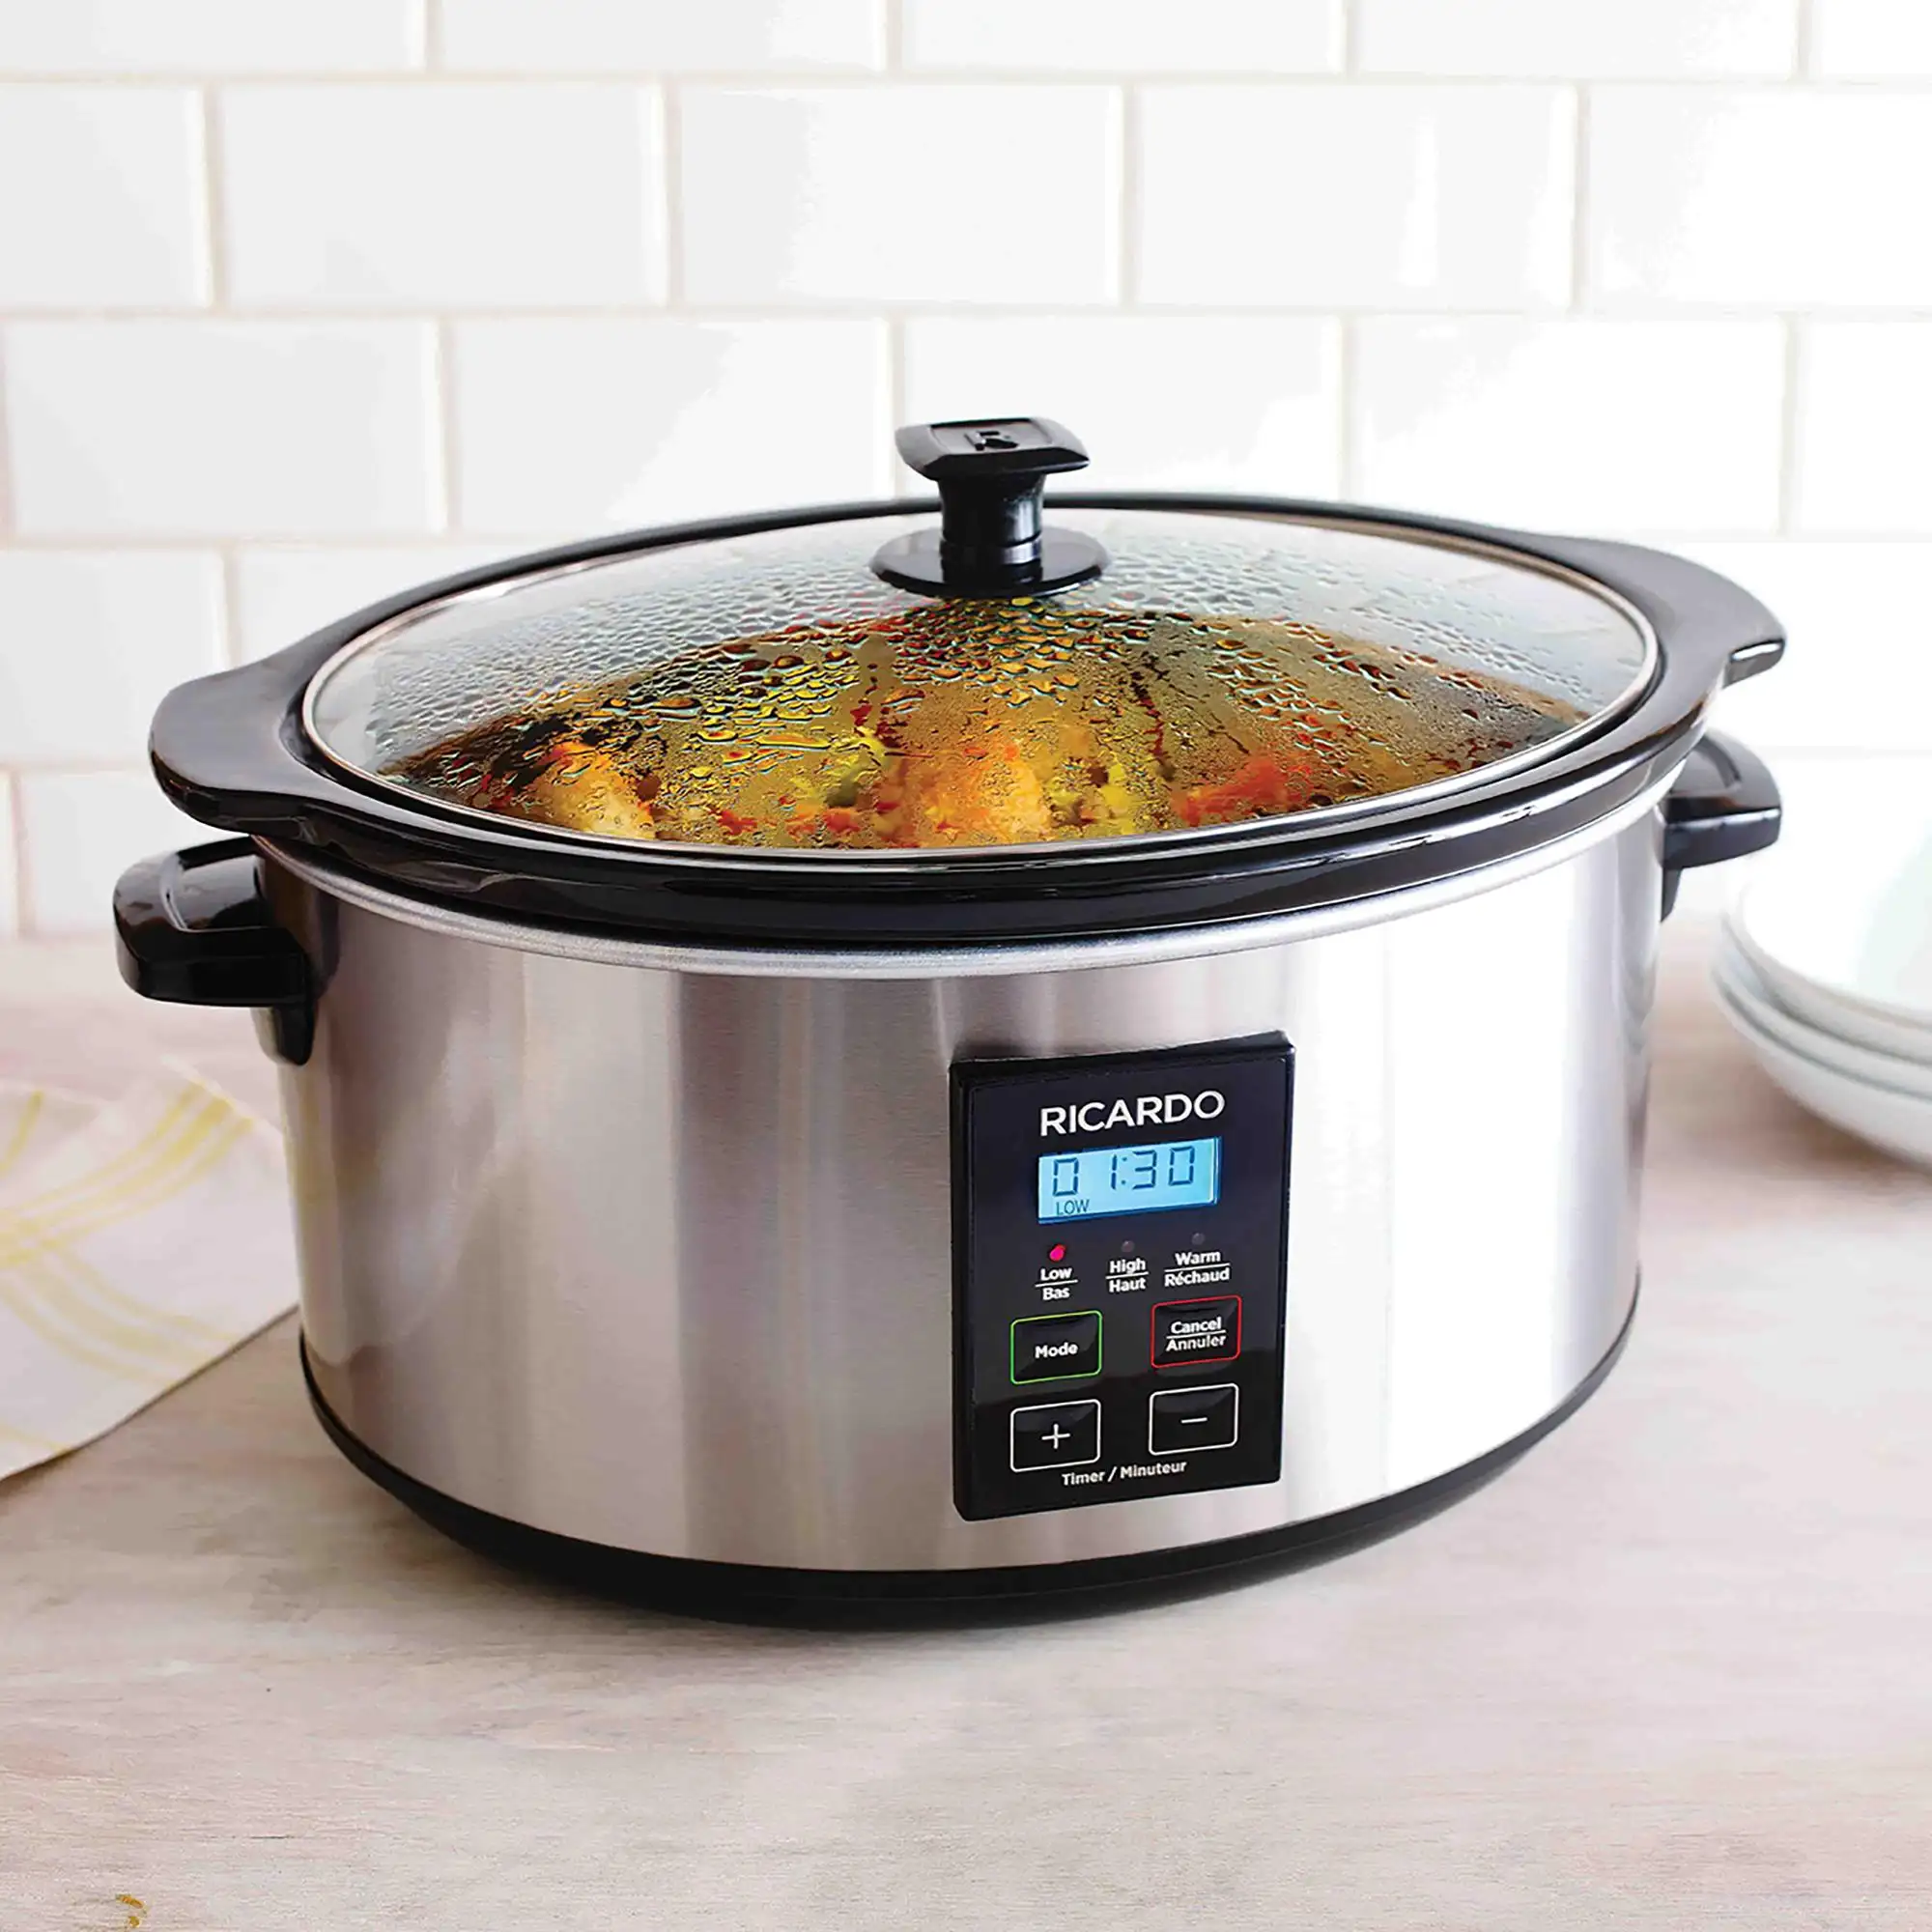 Bella 13973 5 Qt. Programmable Polished Stainless Steel Slow